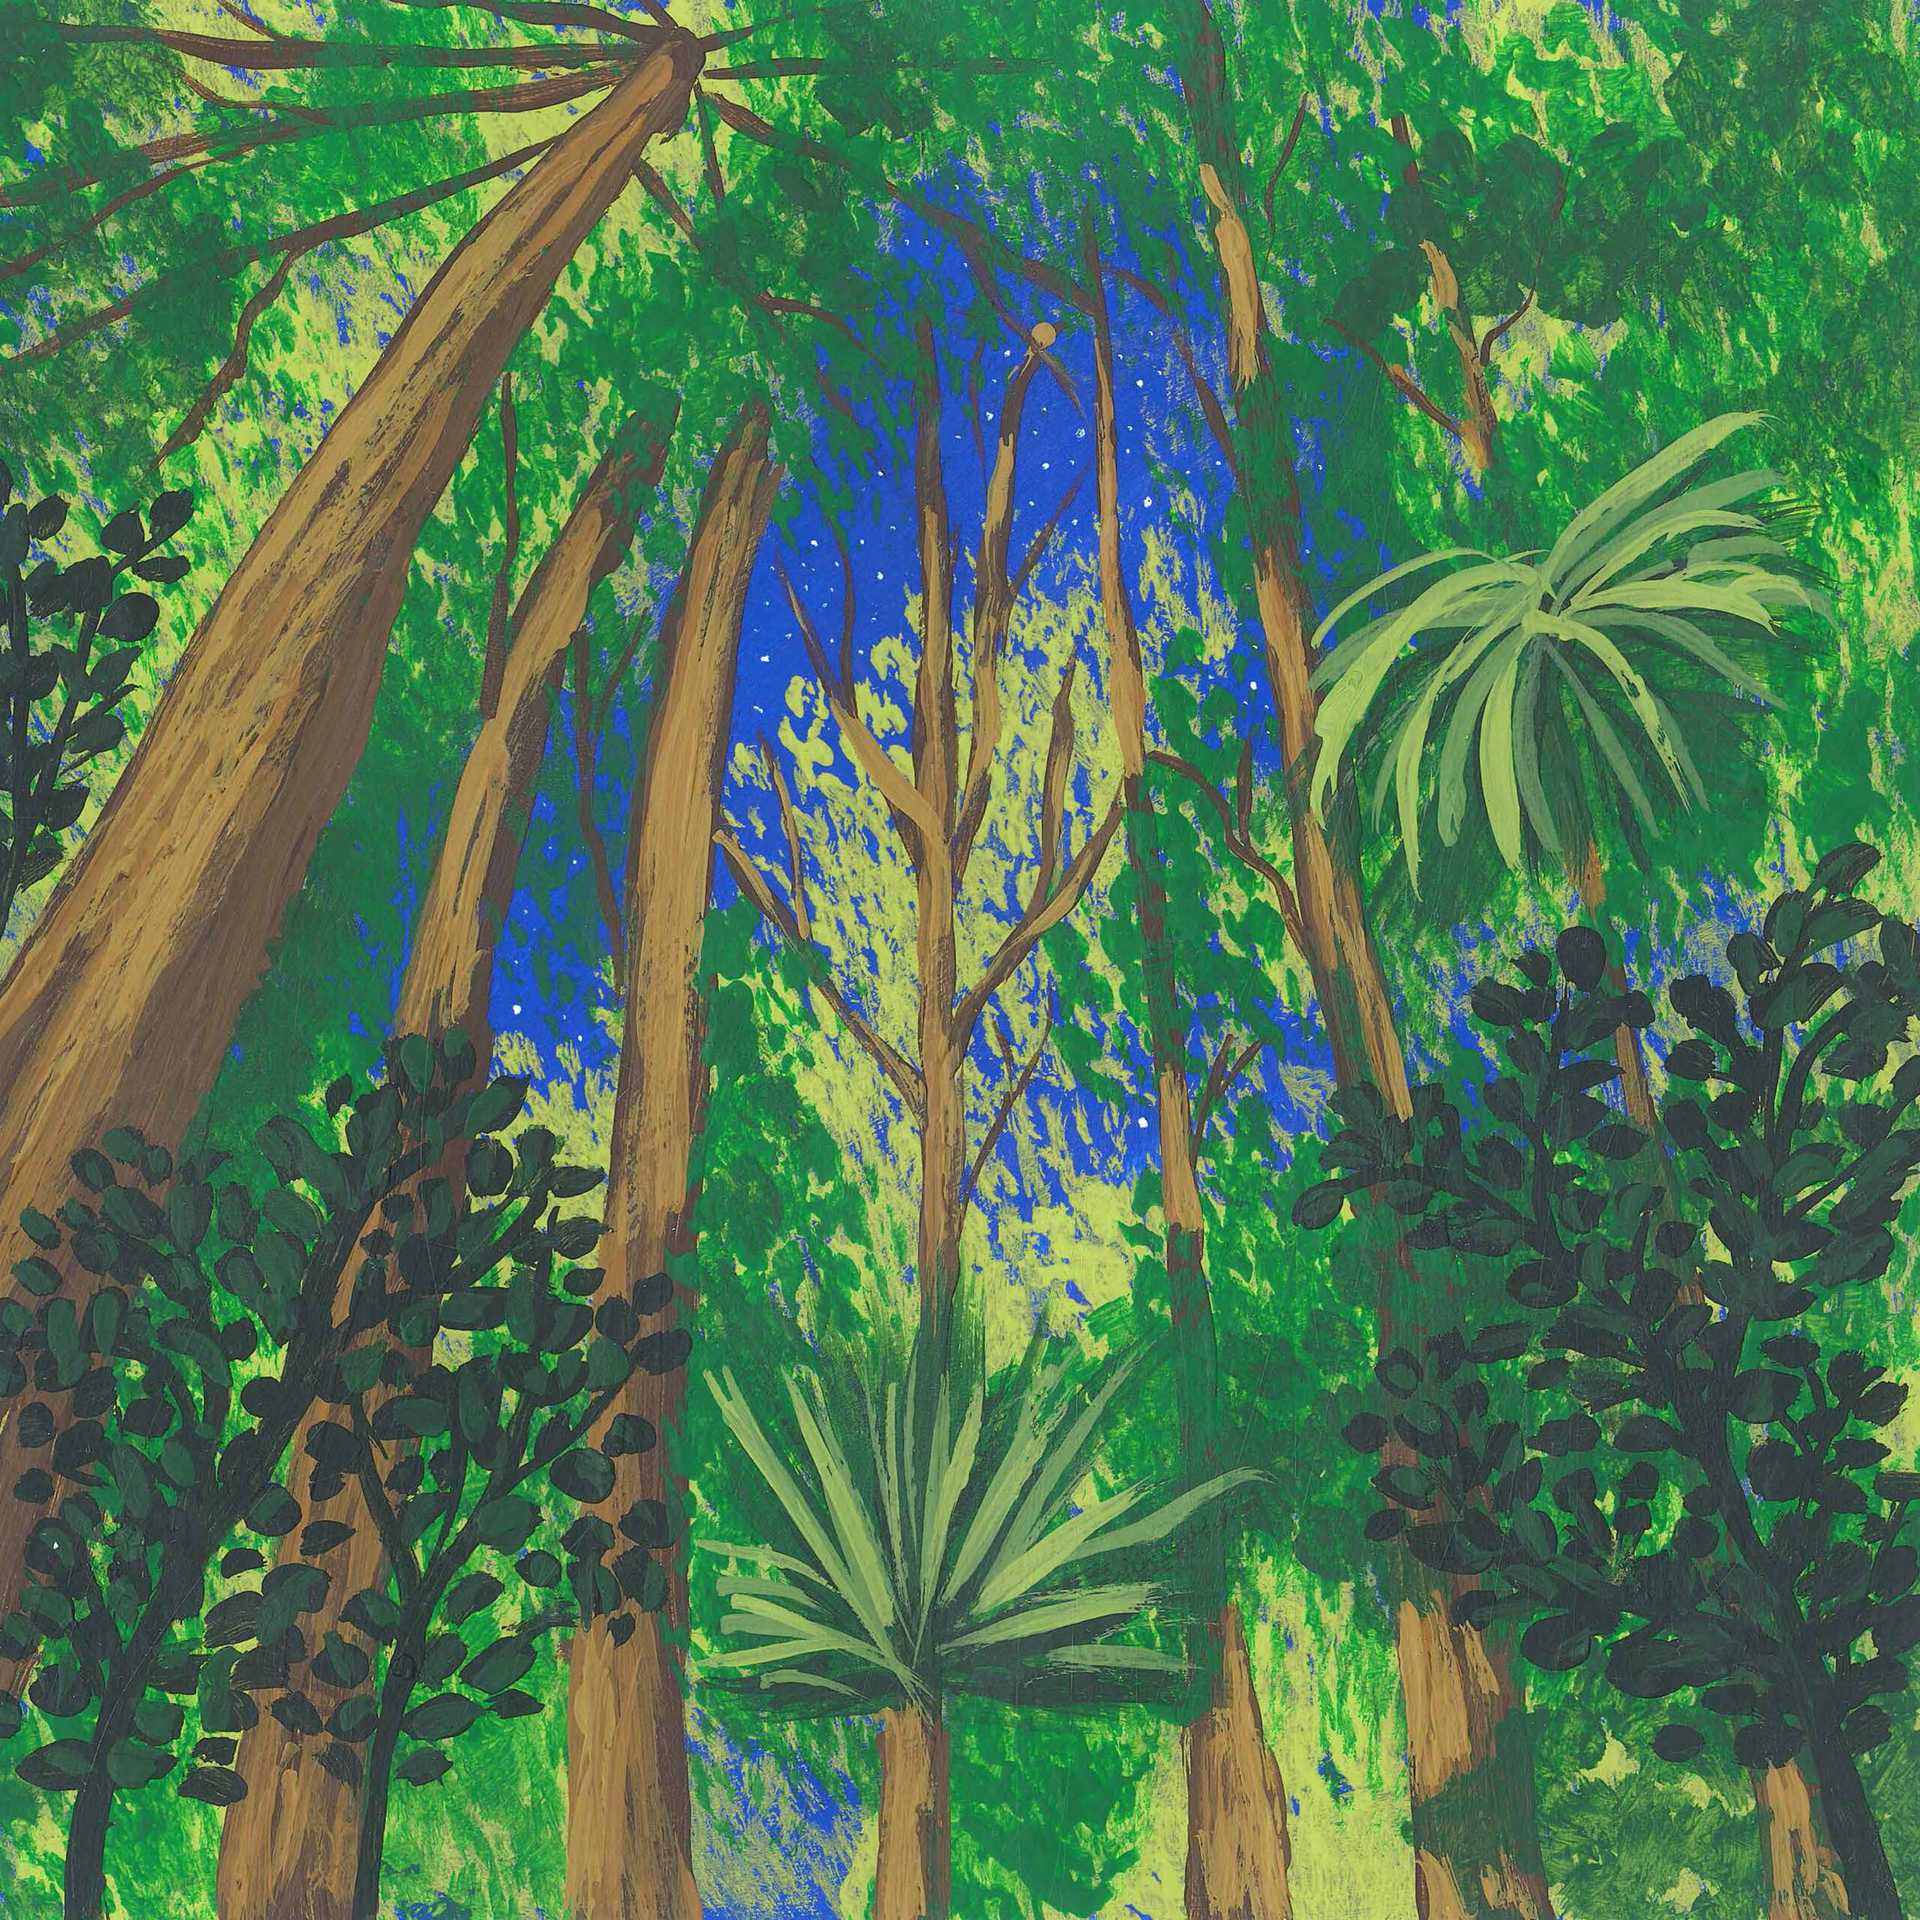 Dawn in Andaman Jungle - nature landscape painting - earth.fm